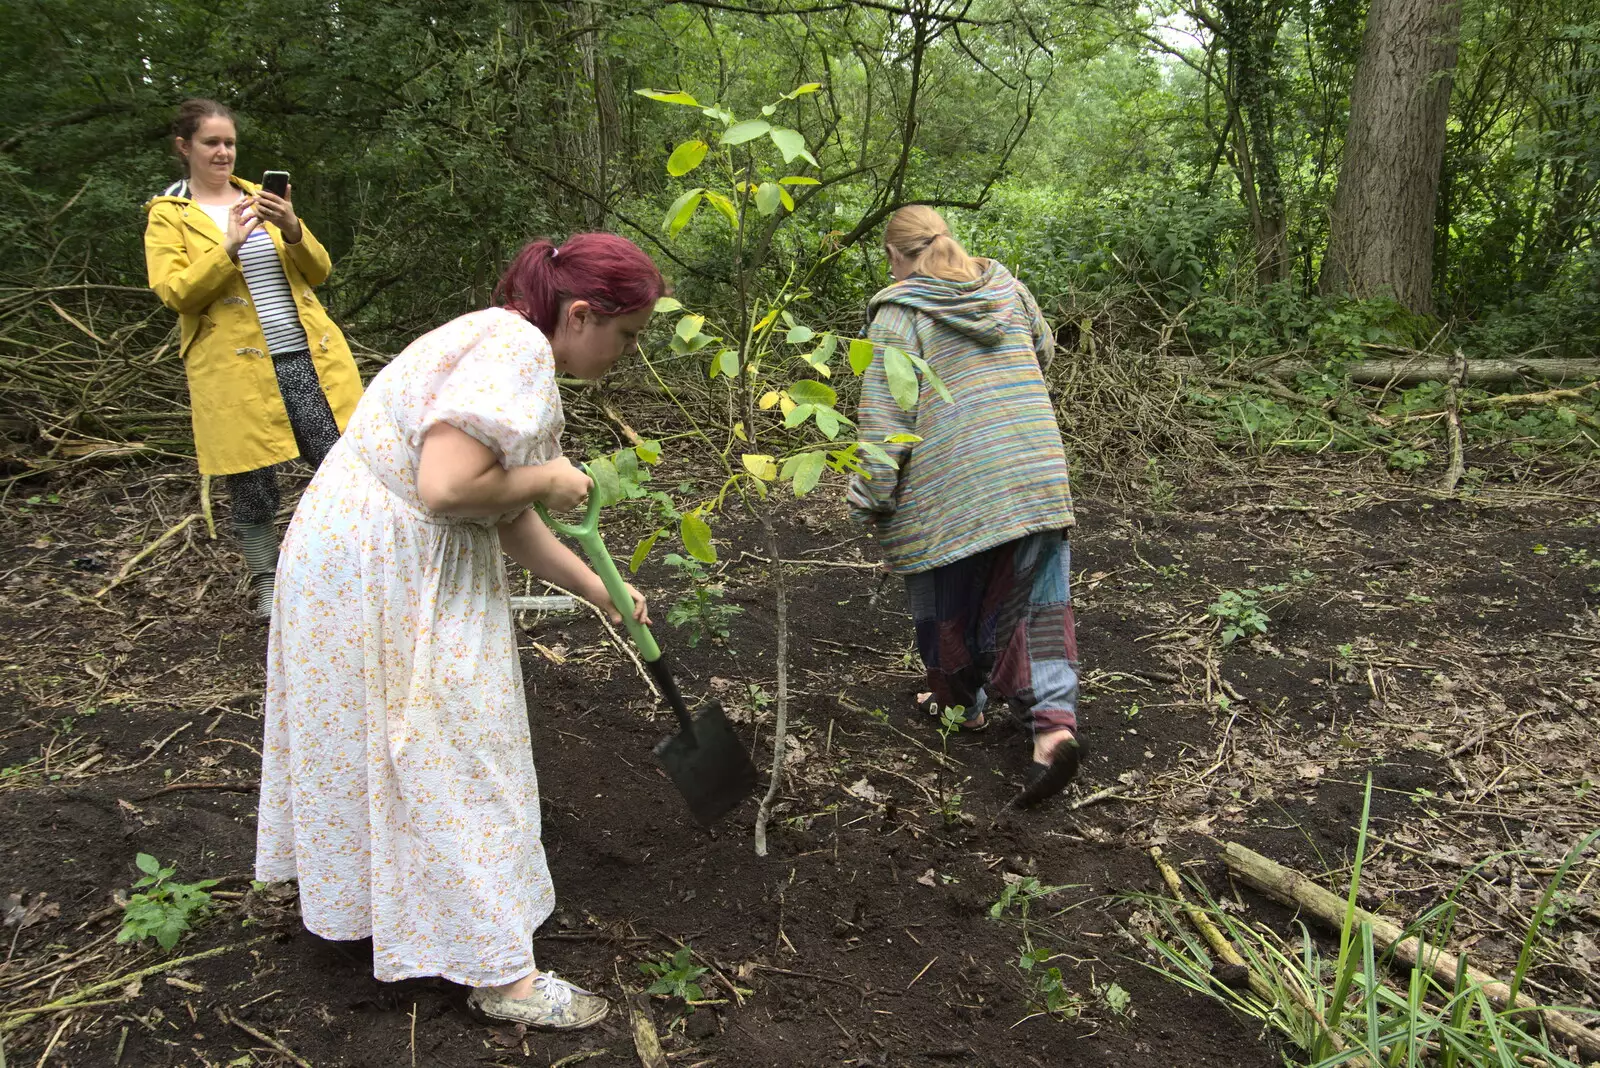 The tree is installed, from Planting a Tree, Town Moors, Eye, Suffolk - 10th July 2021